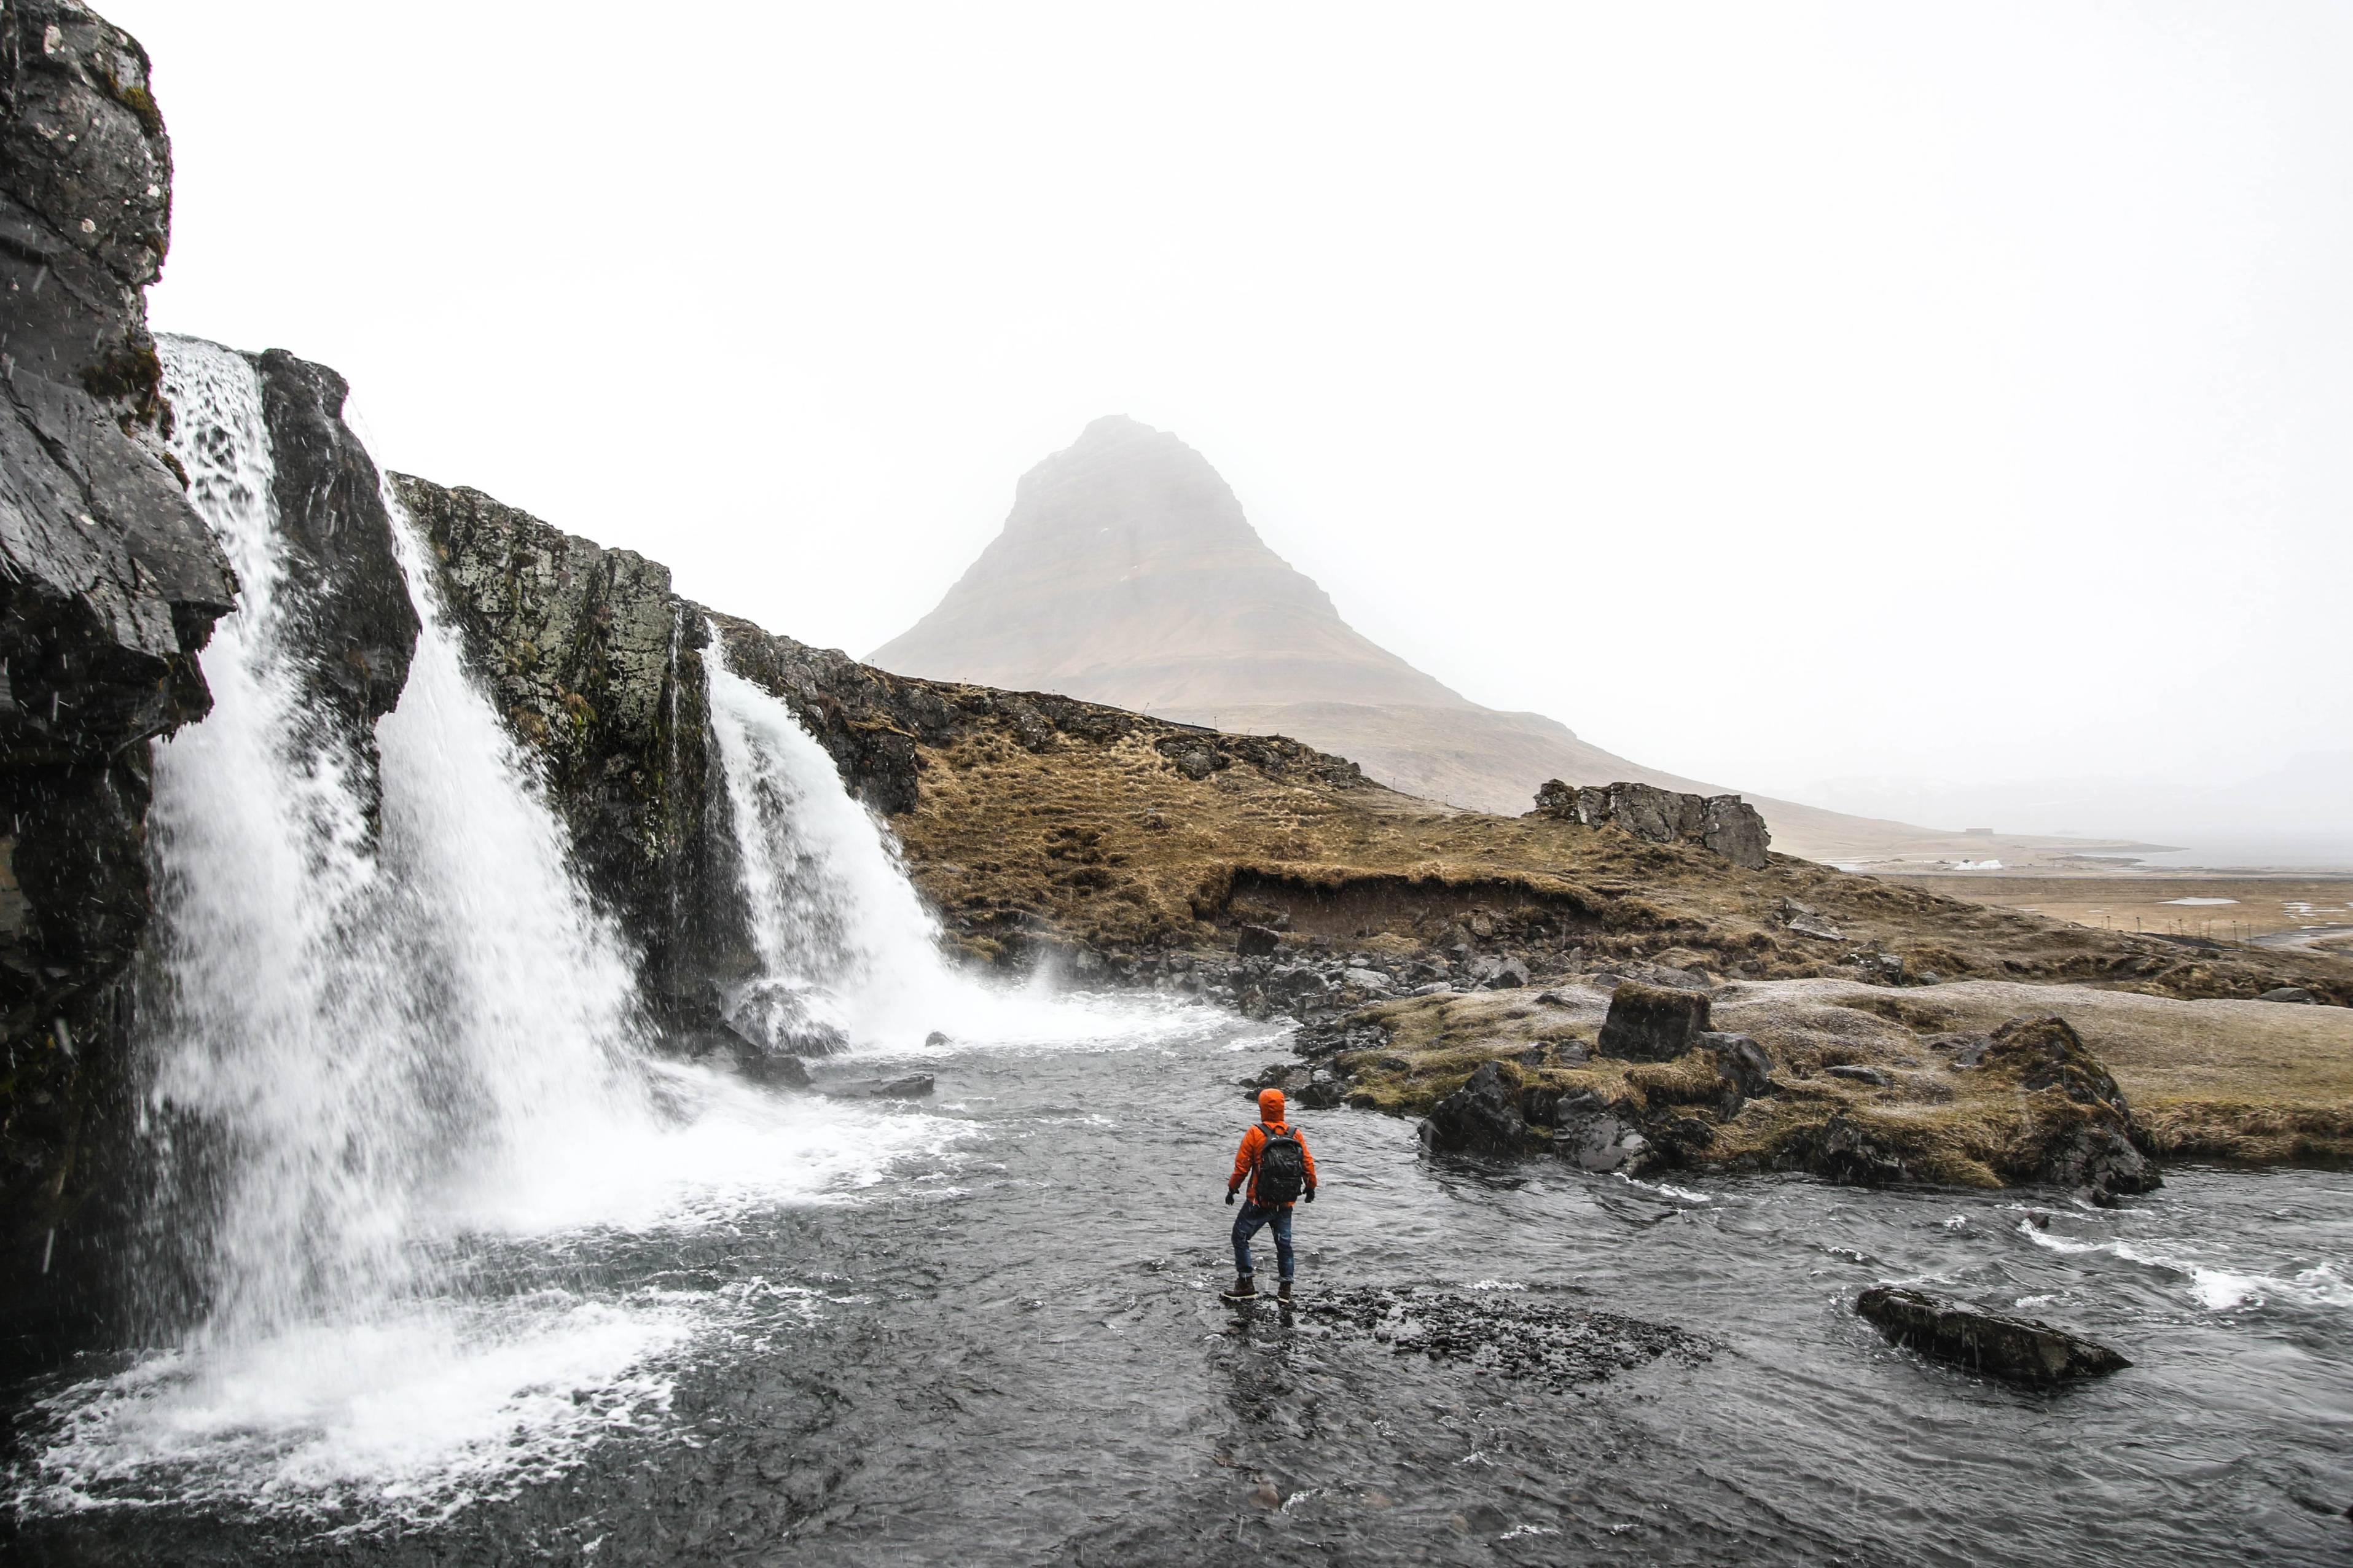 man-in-a-orange-jacket-walking-in-stream-on-a-cold-cloudy-day-in-iceland-with-mount-kirkjufell-in-background